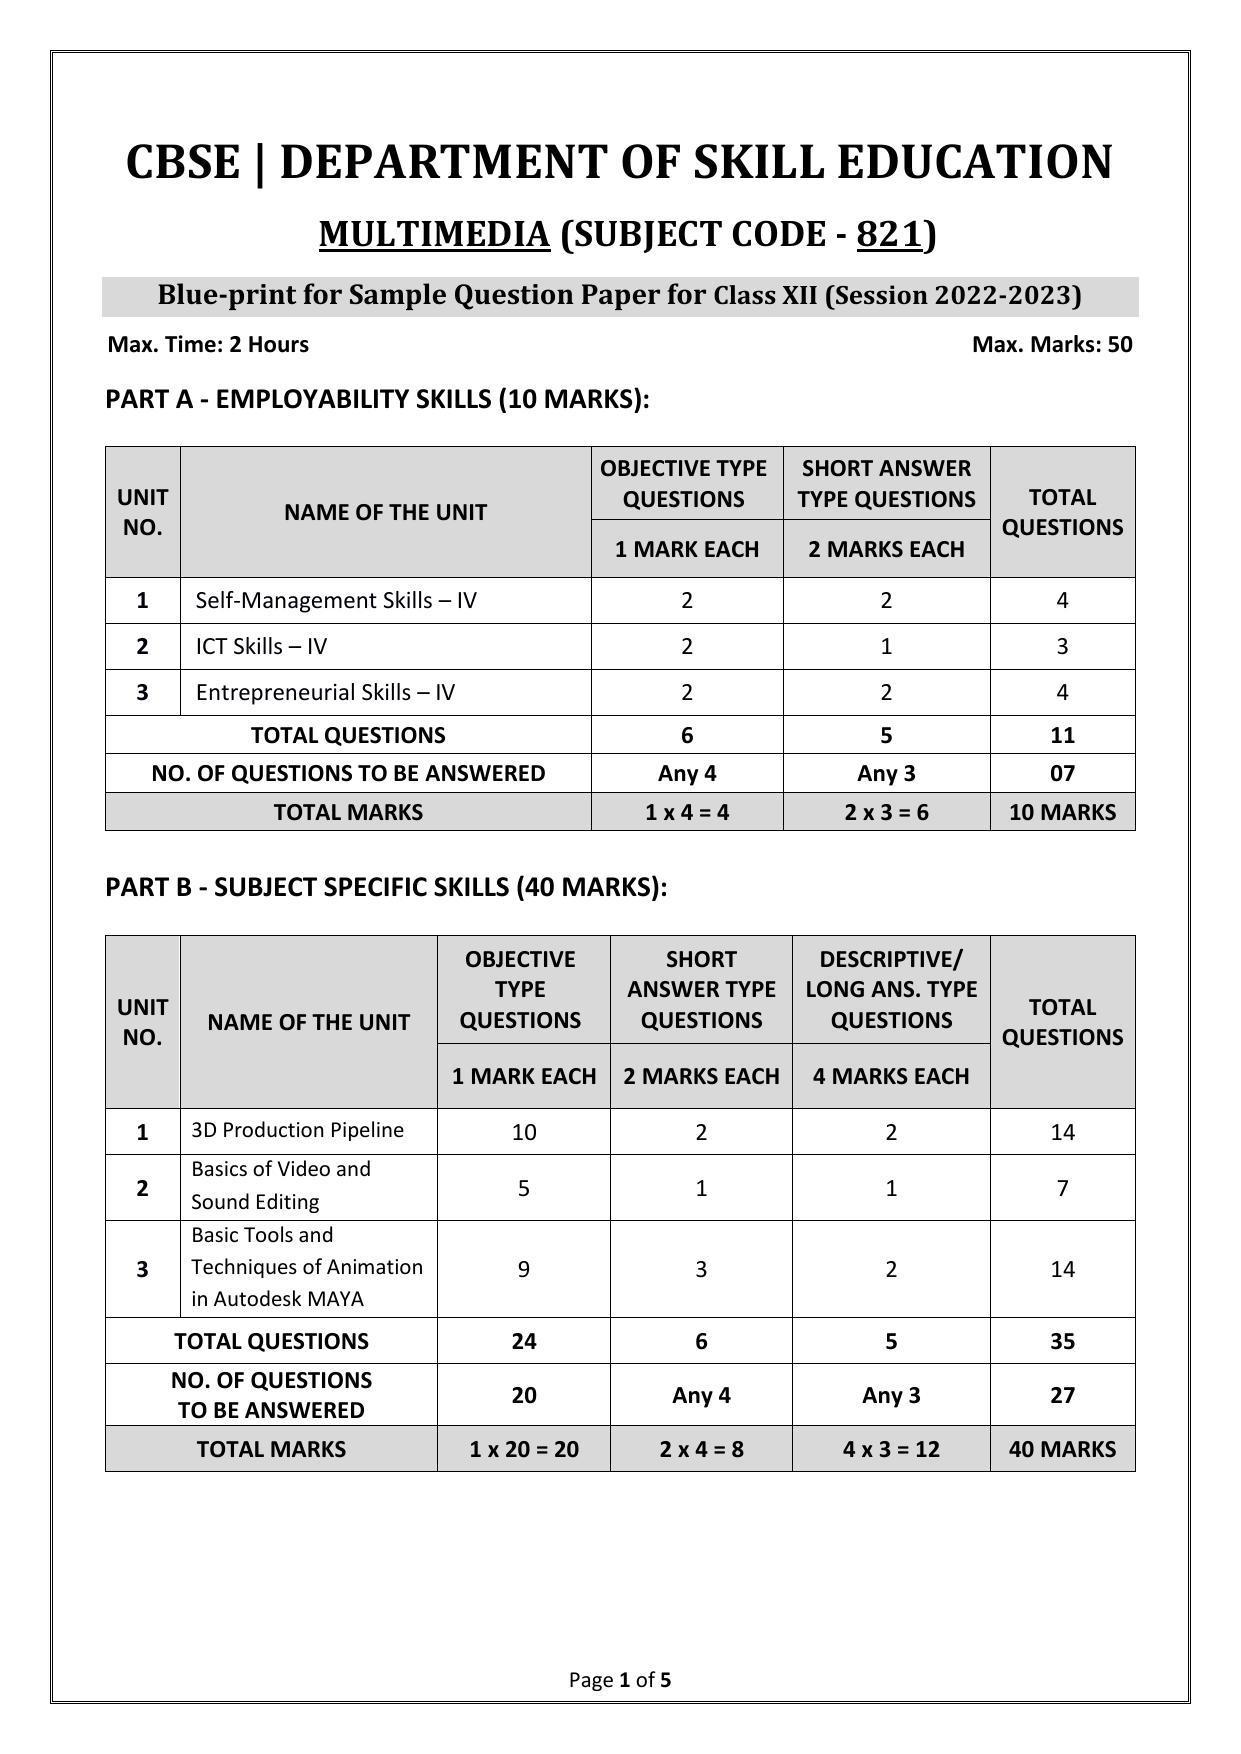 CBSE Class 12 Multi Media (Skill Education) Sample Papers 2023 - Page 1